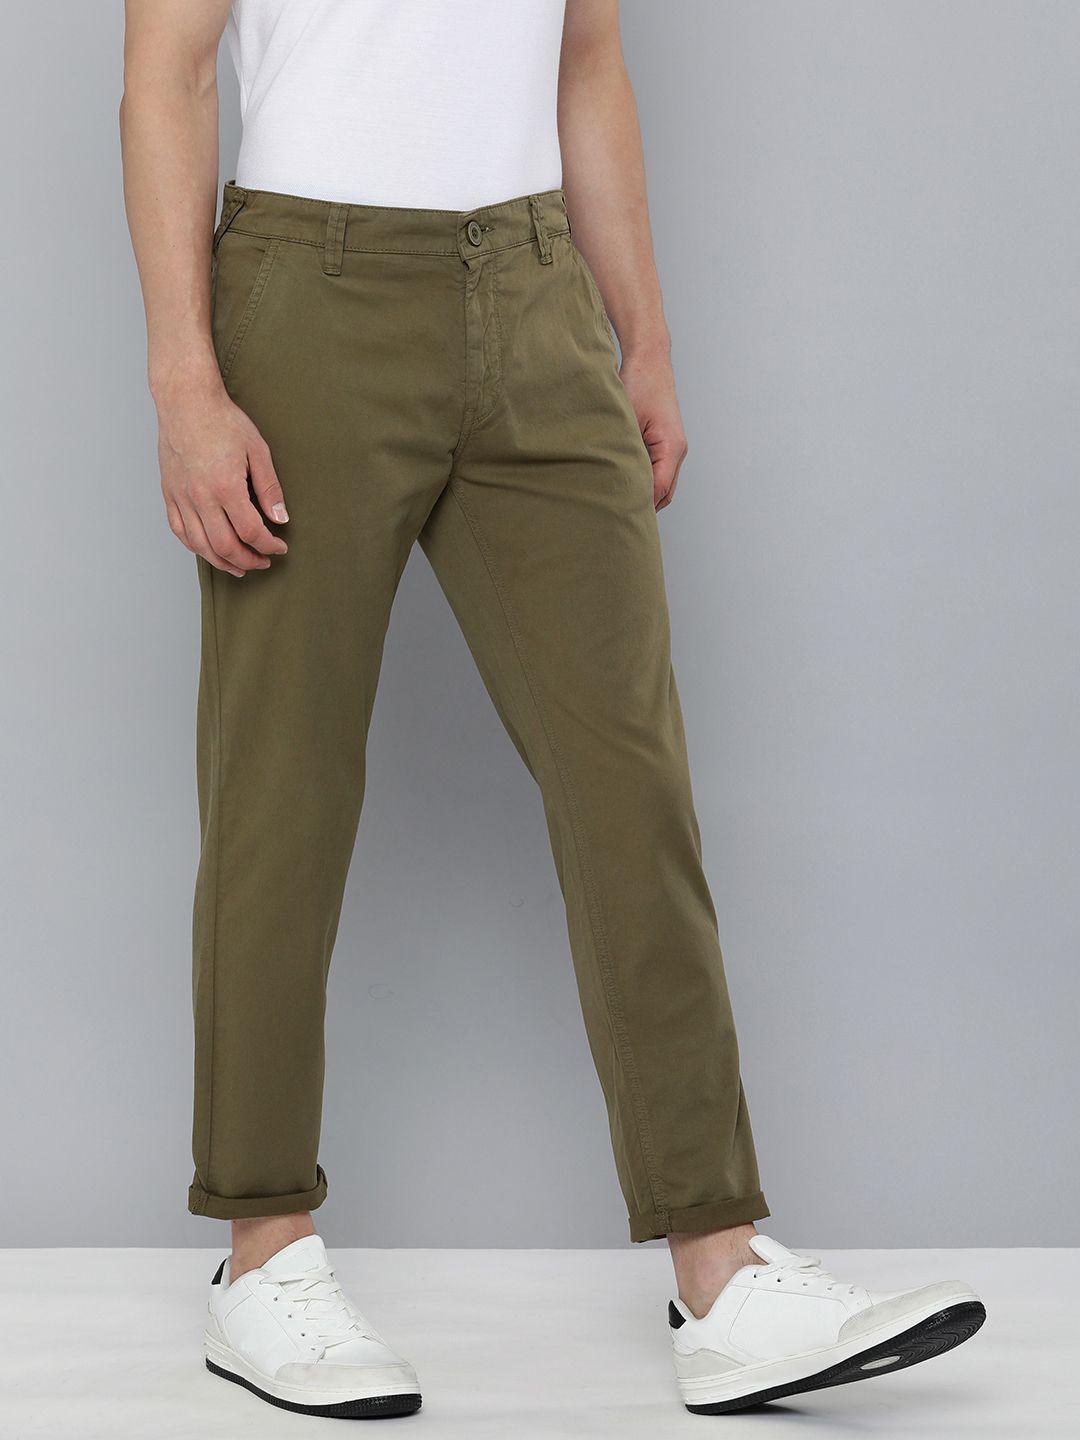 here&now men olive green slim fit trousers